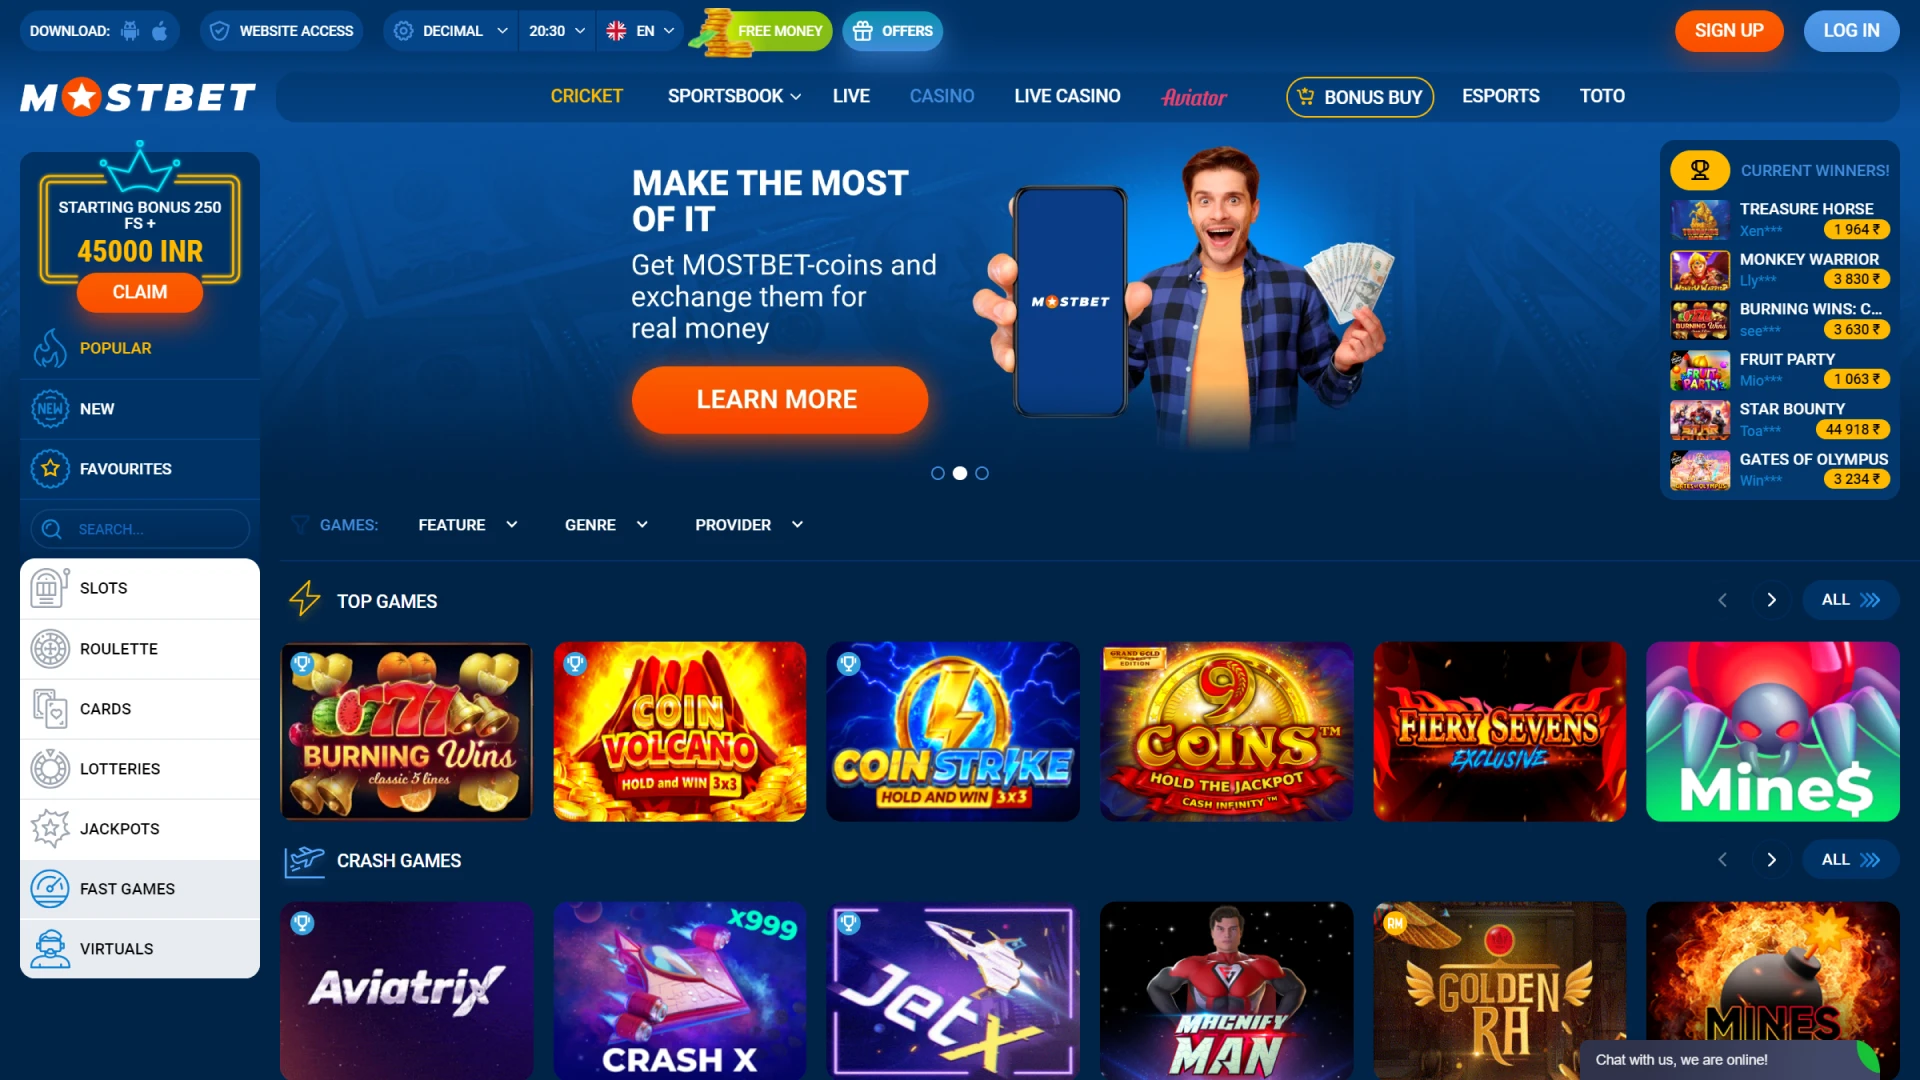 Play casino games at Mostbet.